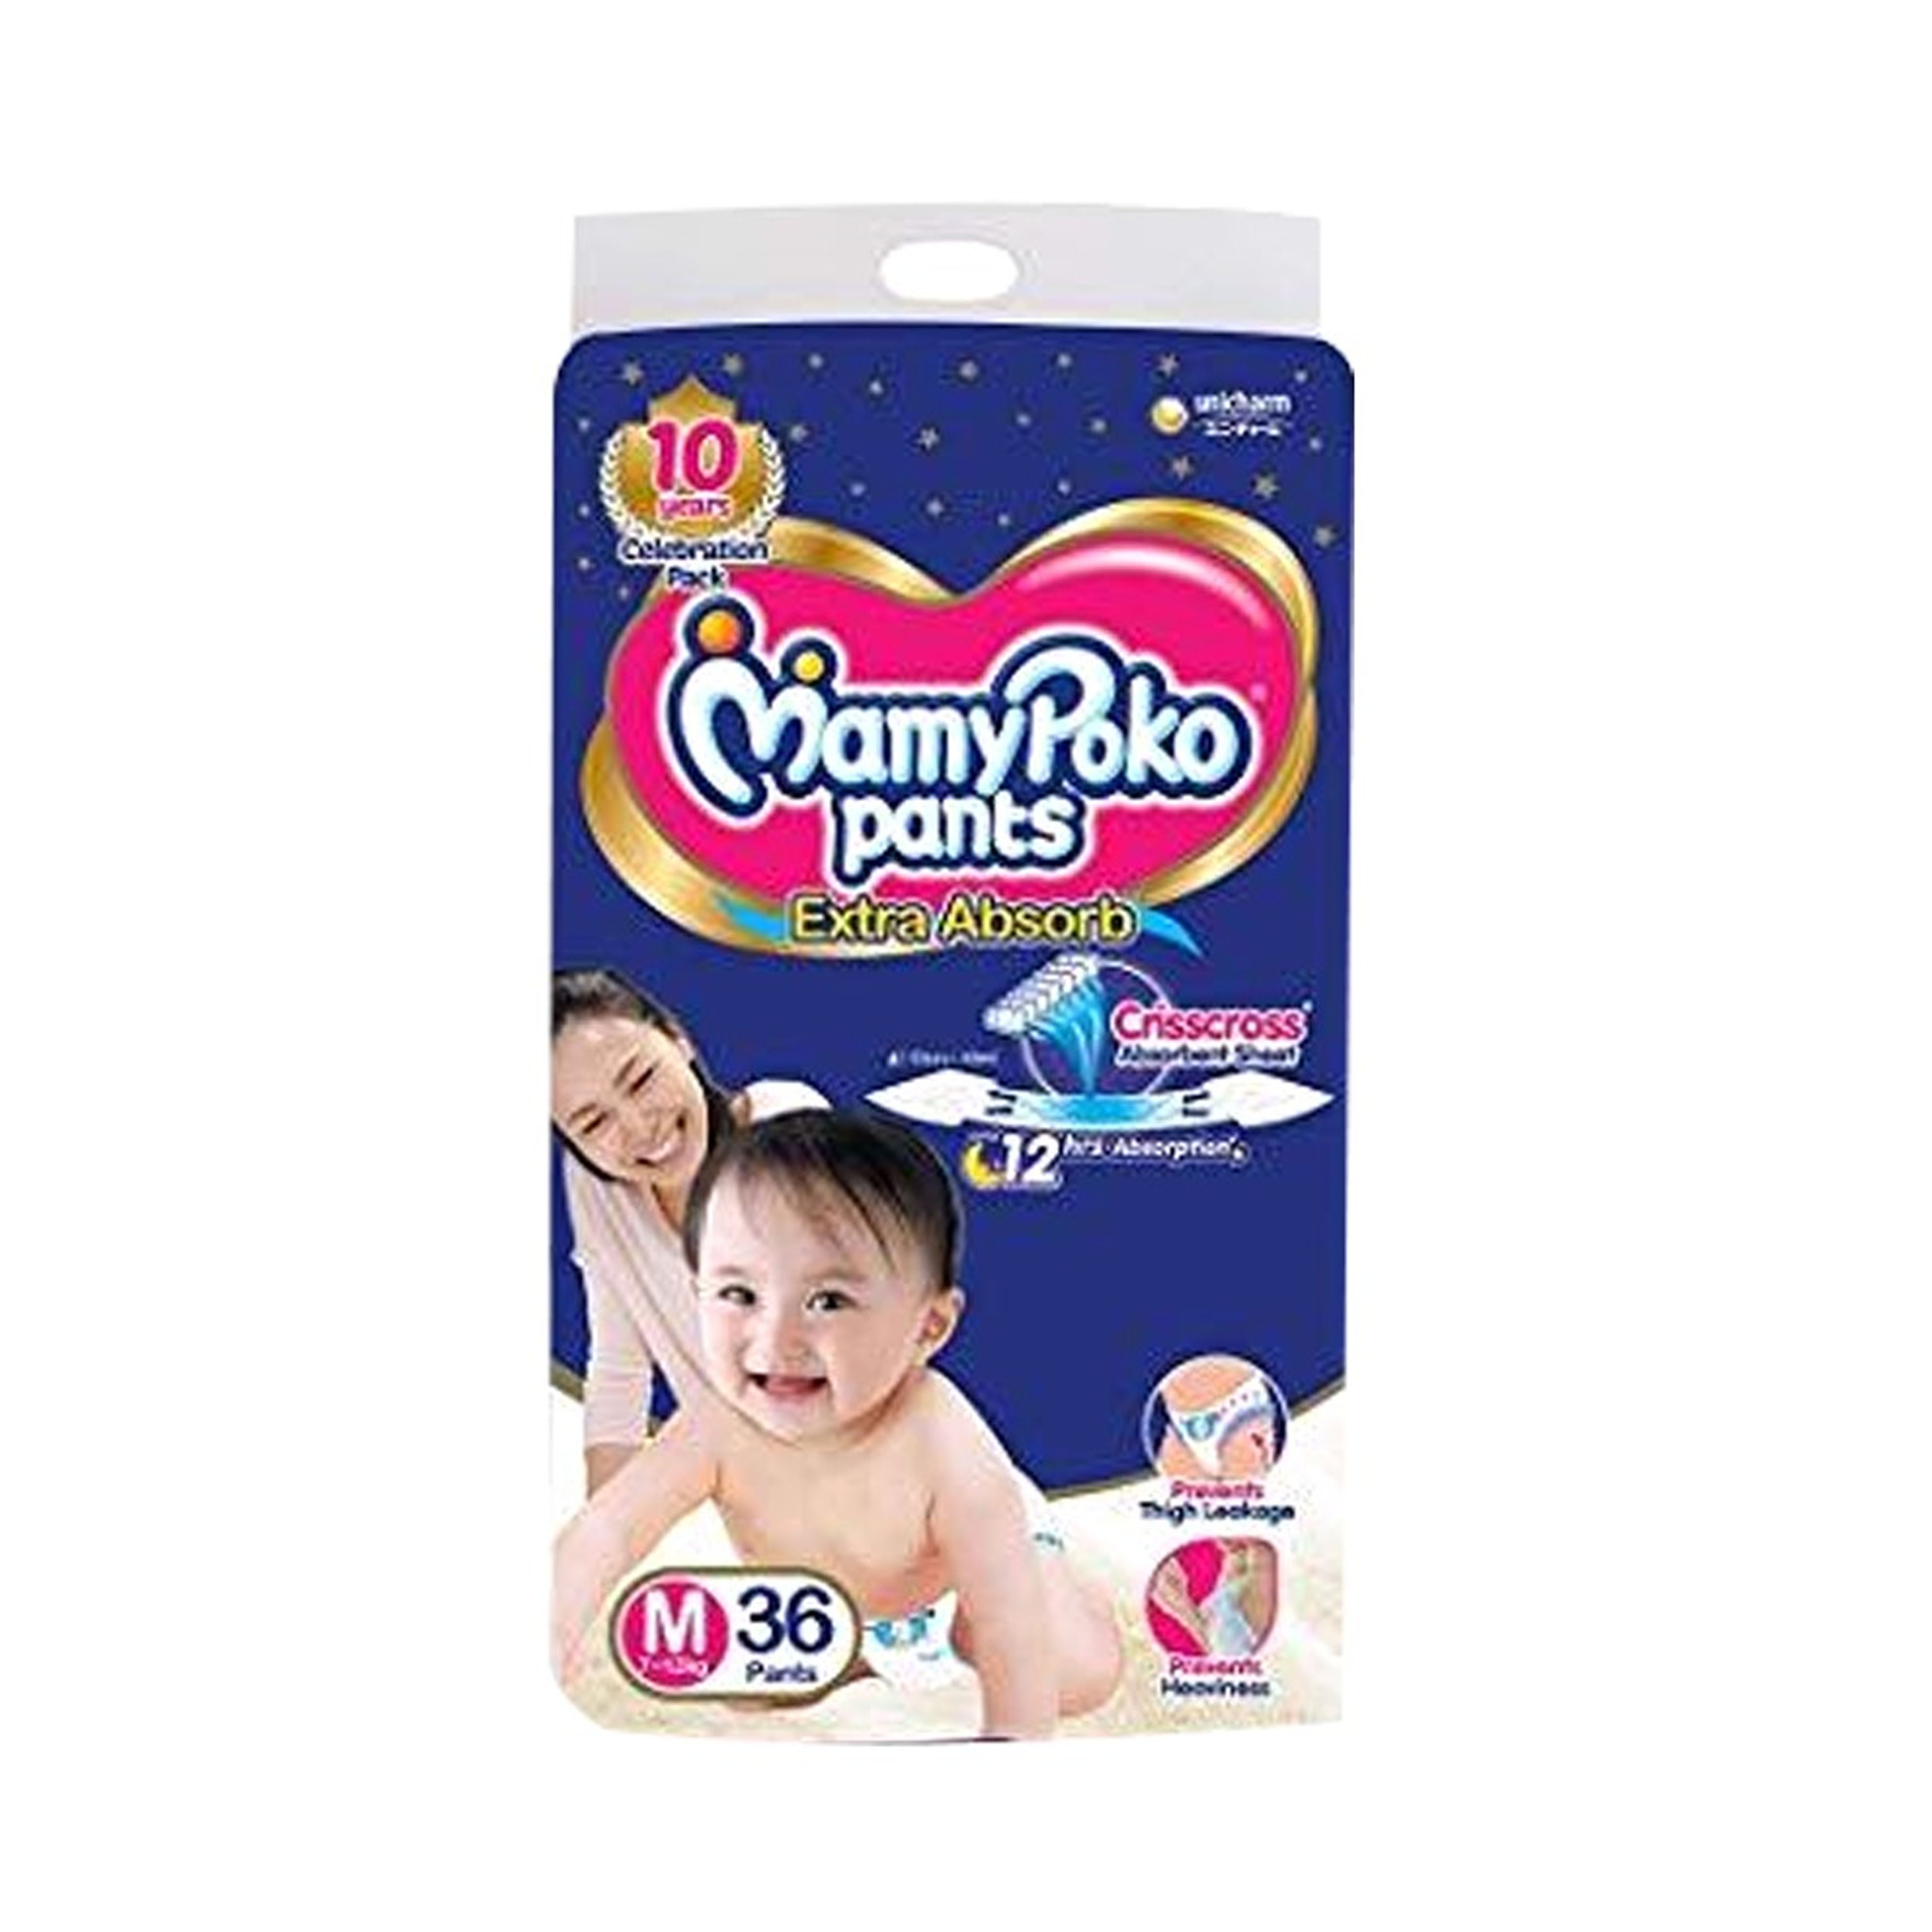 MamyPoko Pants Diaper Pant M 7-12 kg - Chaldal 🥚Online Grocery Shopping and Delivery in Bangladesh | Buy fresh items, personal care, baby products and more